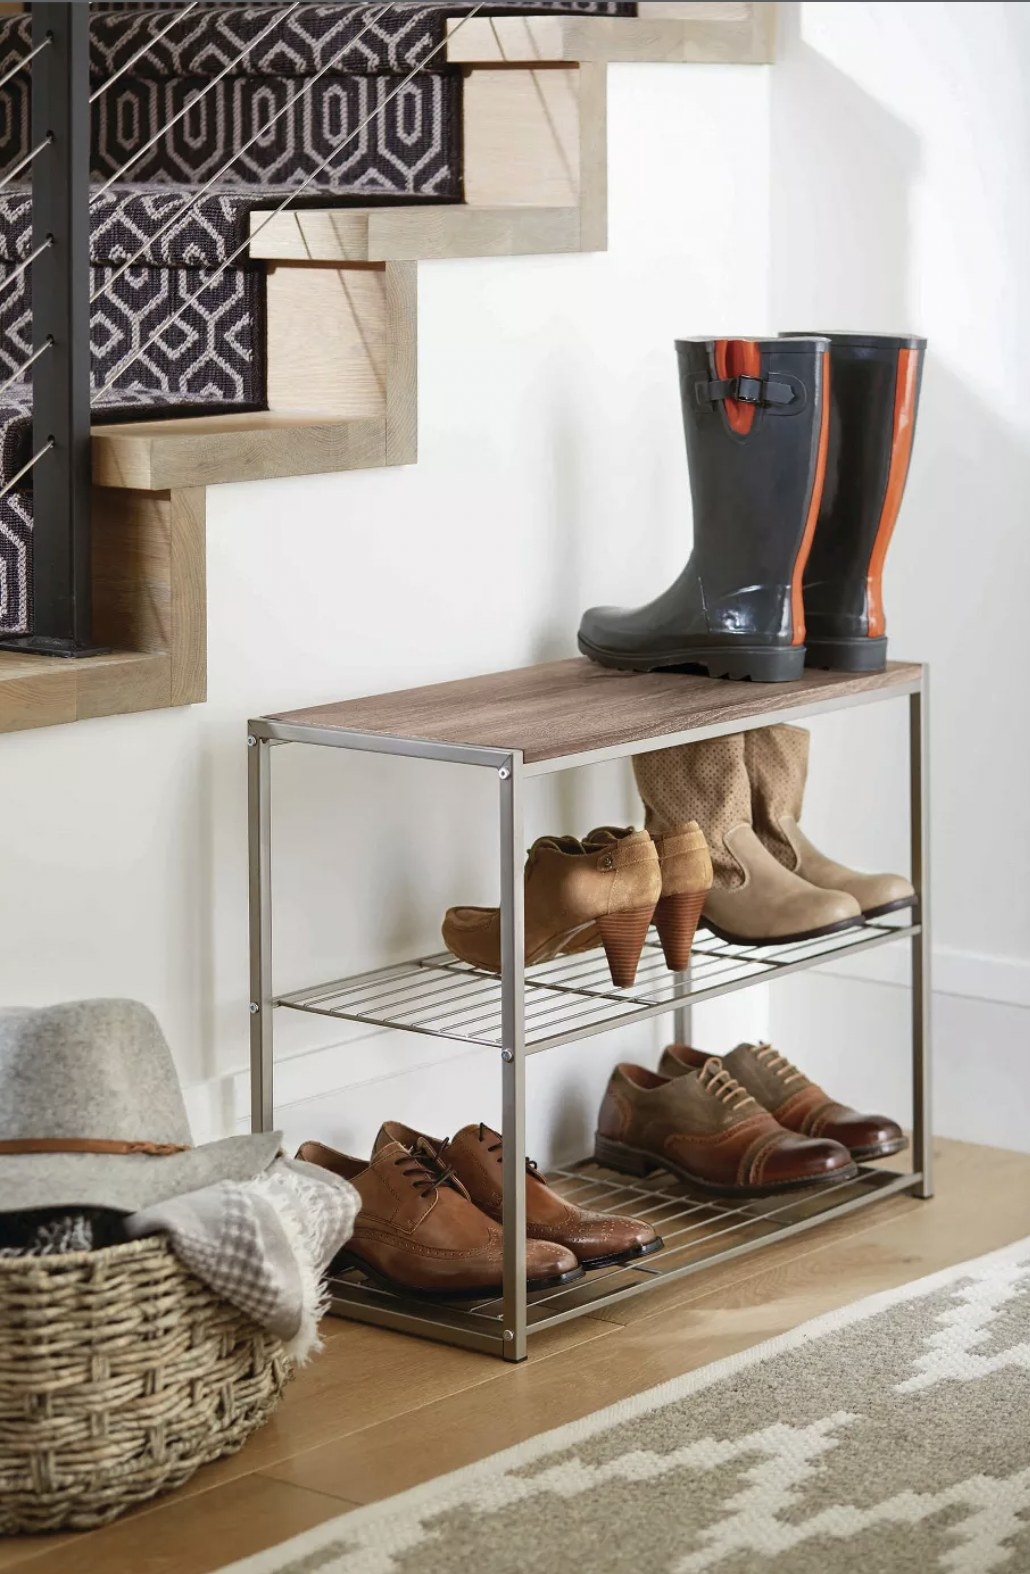 The shoe rack storing dress shoes and boots